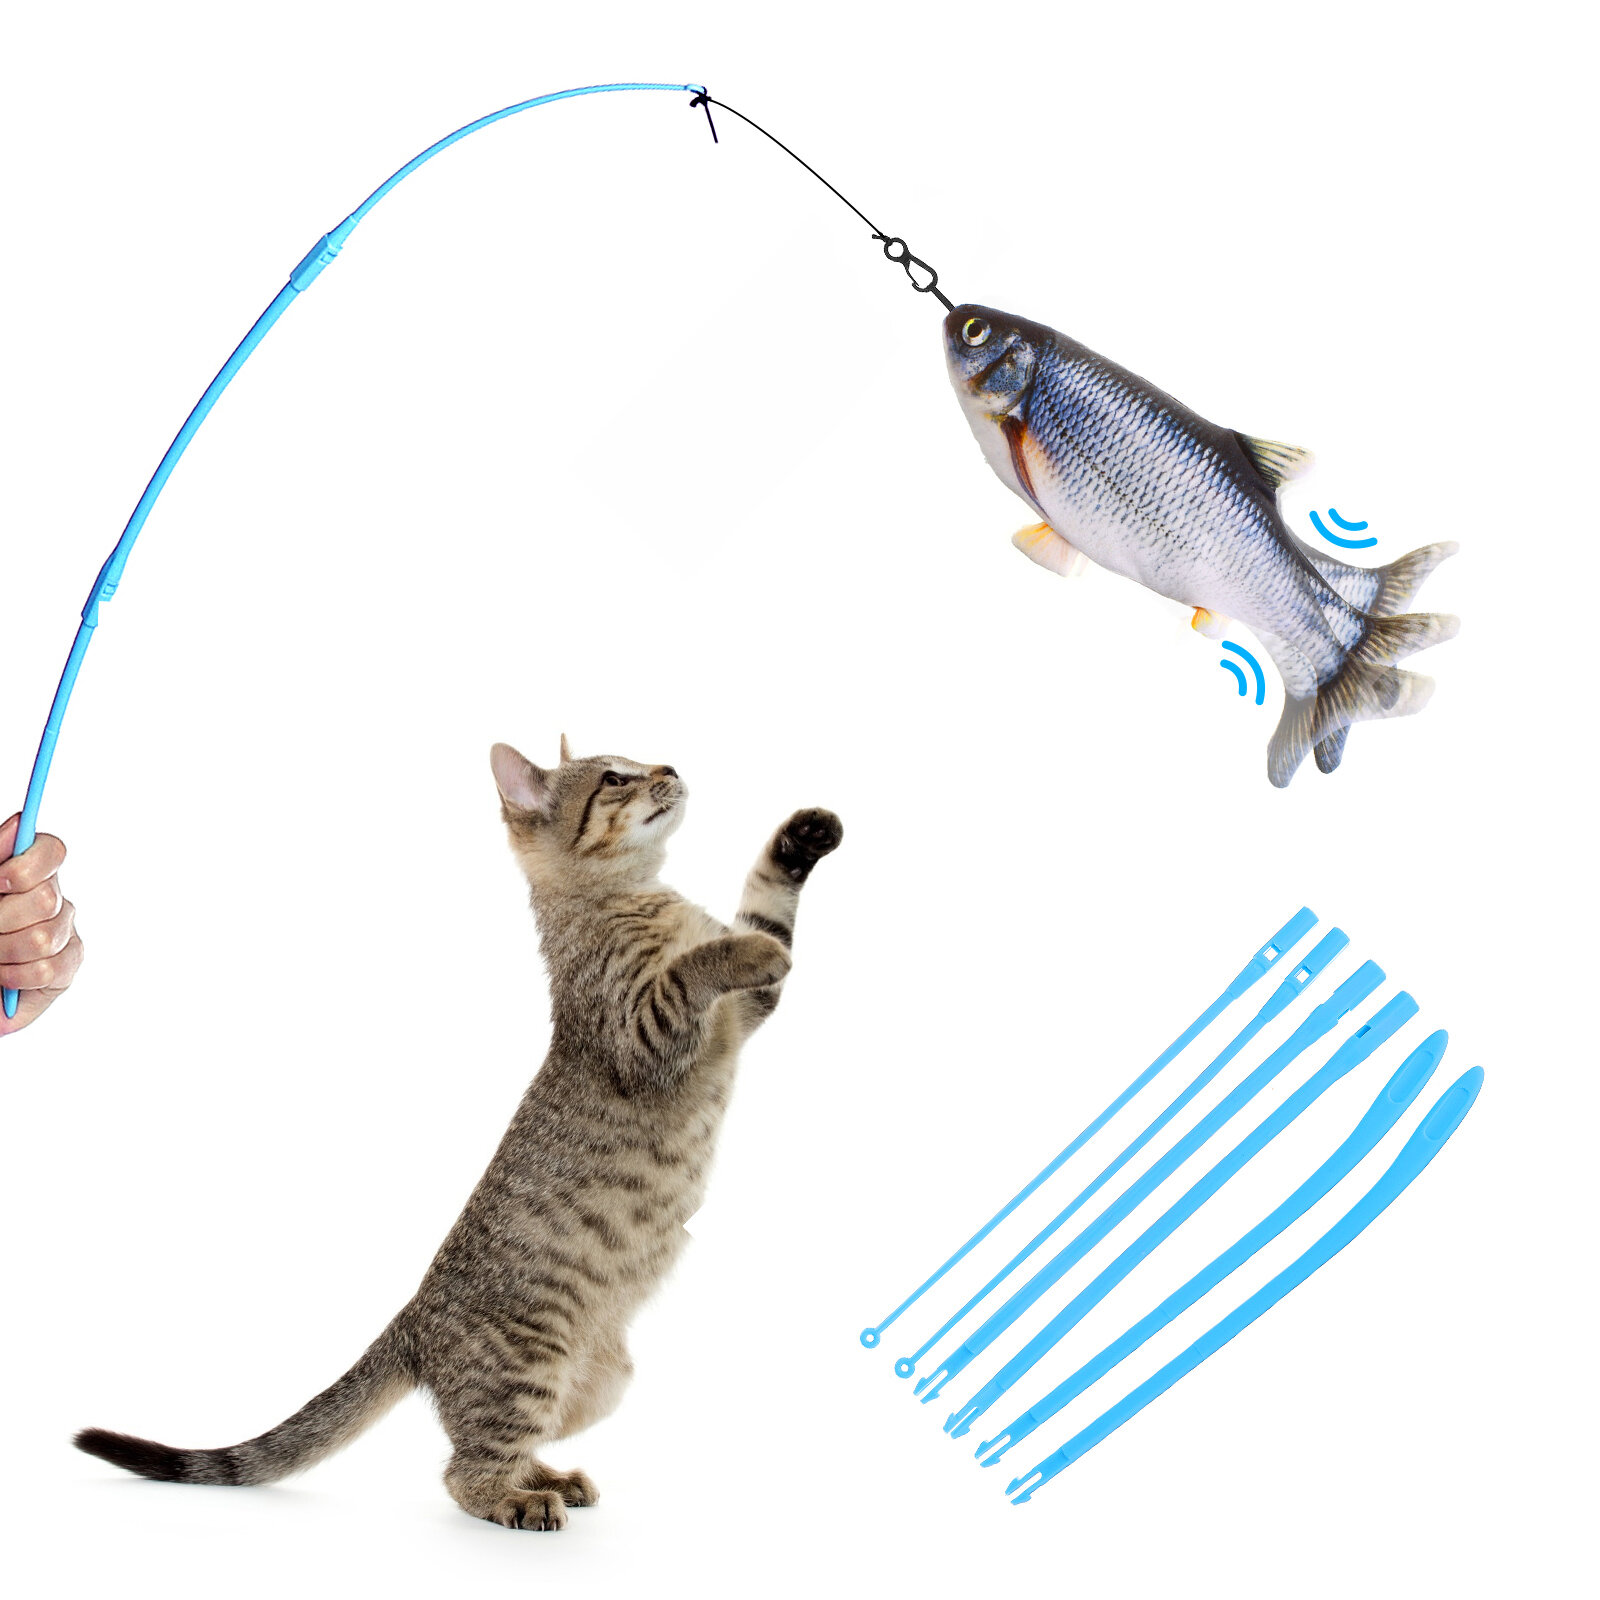 Moving Fish Cat Toy Soft and Comfortable Plush Material Easy to Clean Enhancing Interaction with Pets